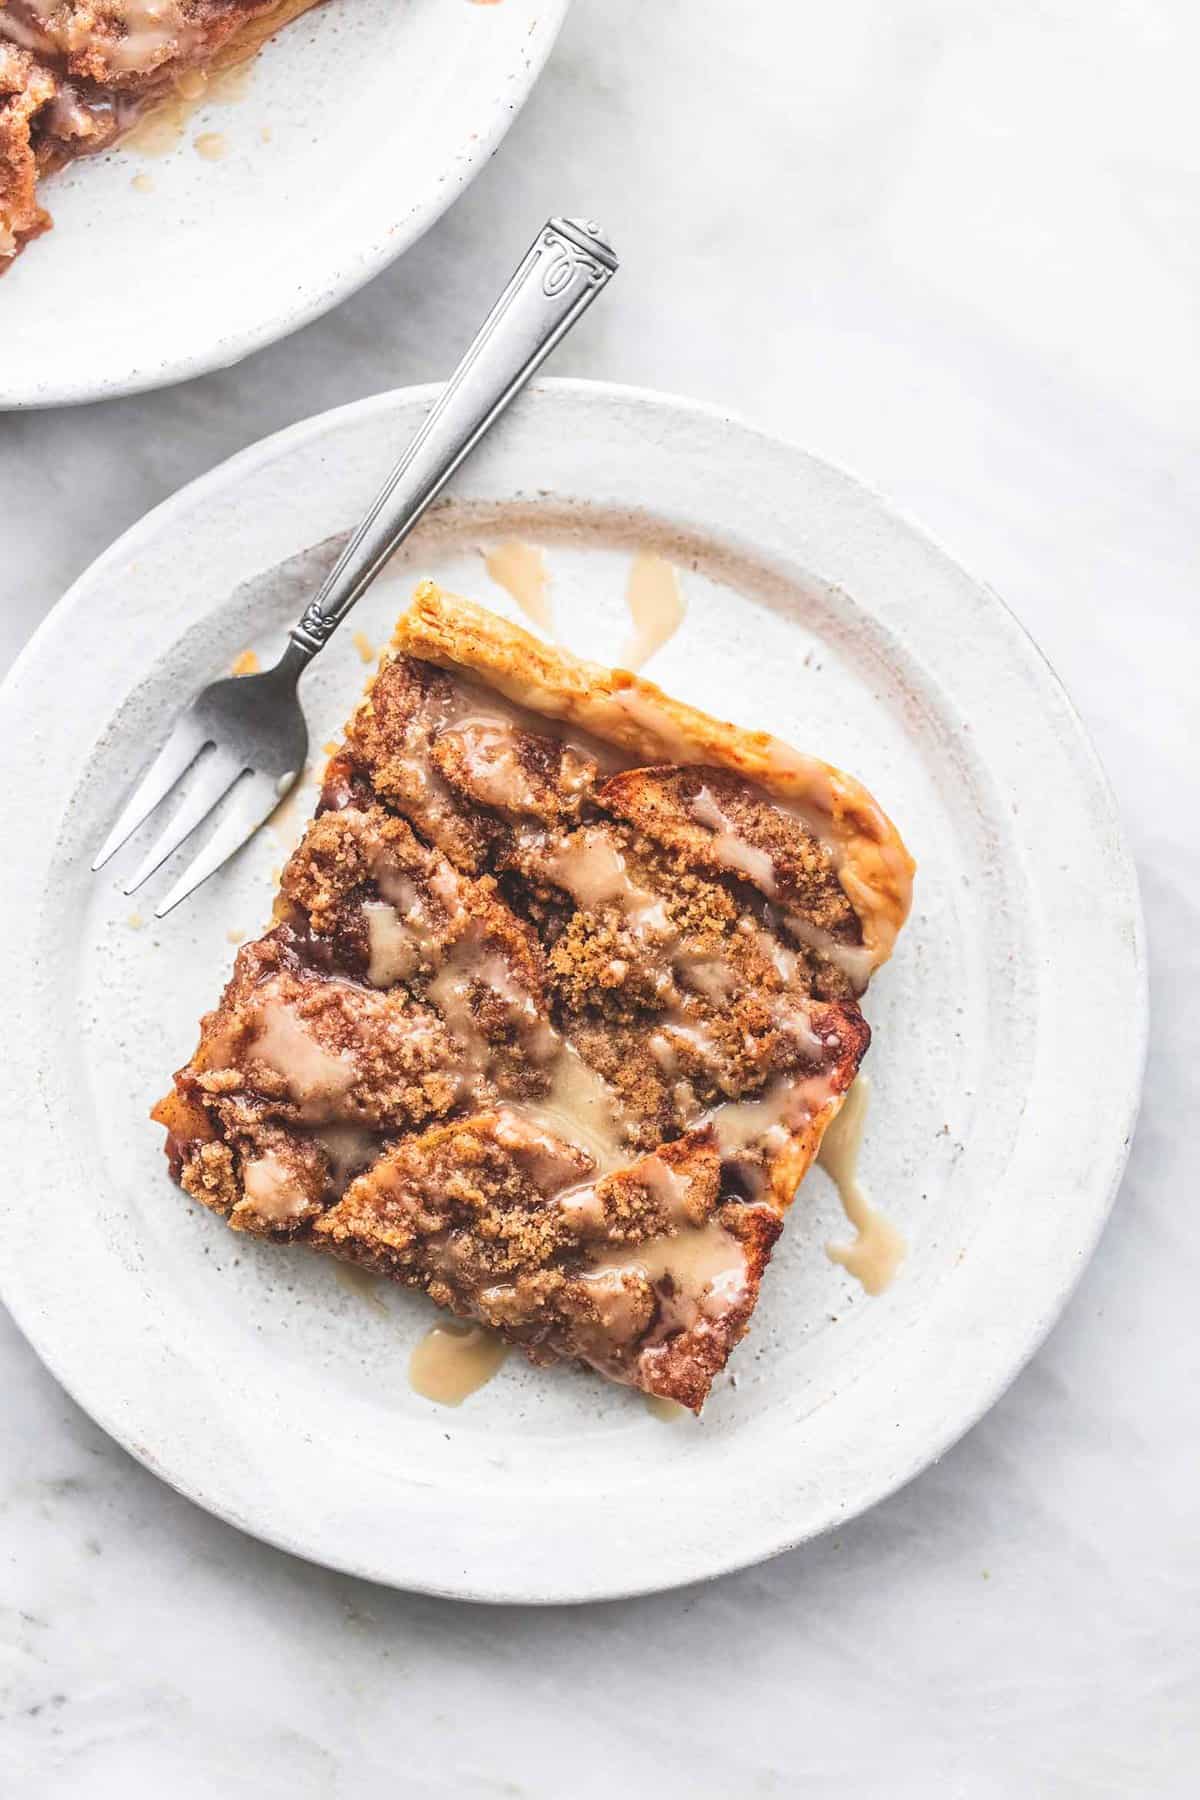 top view of a piece of apple slab pie with a fork on a plate.